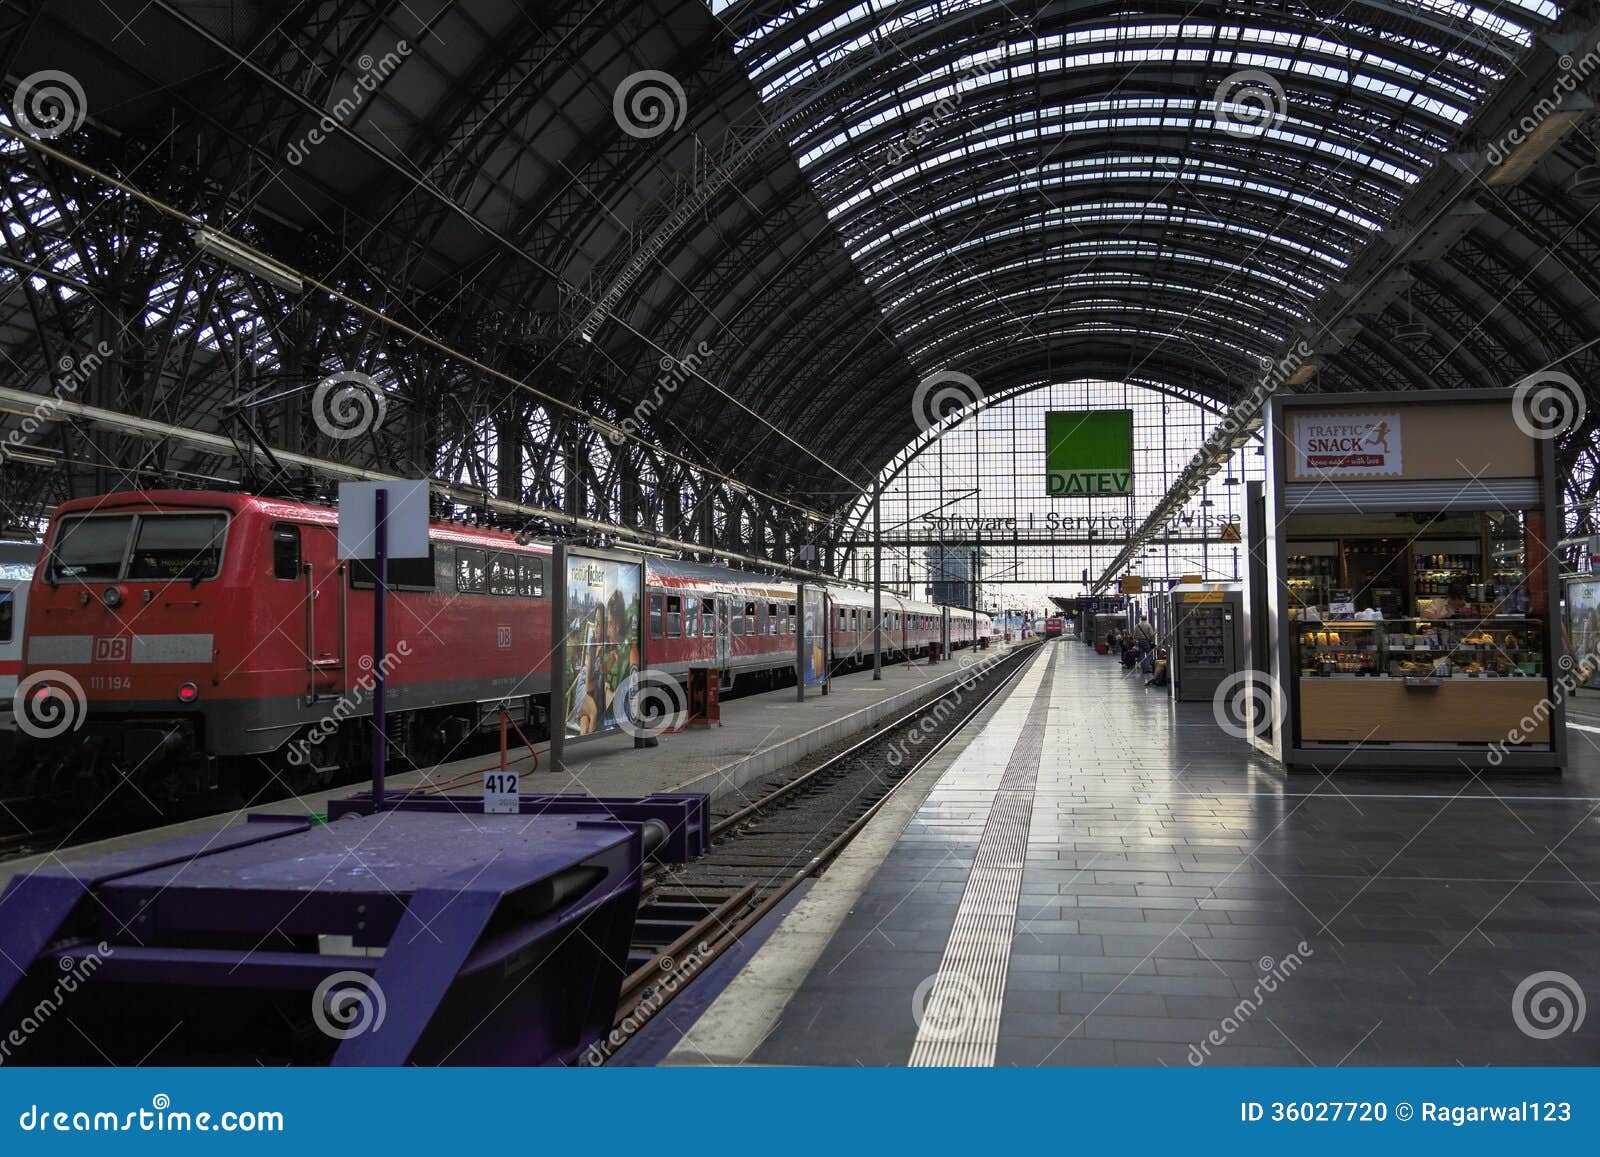 Train Station in Frankfurt, Germany Editorial Image - Image of ...